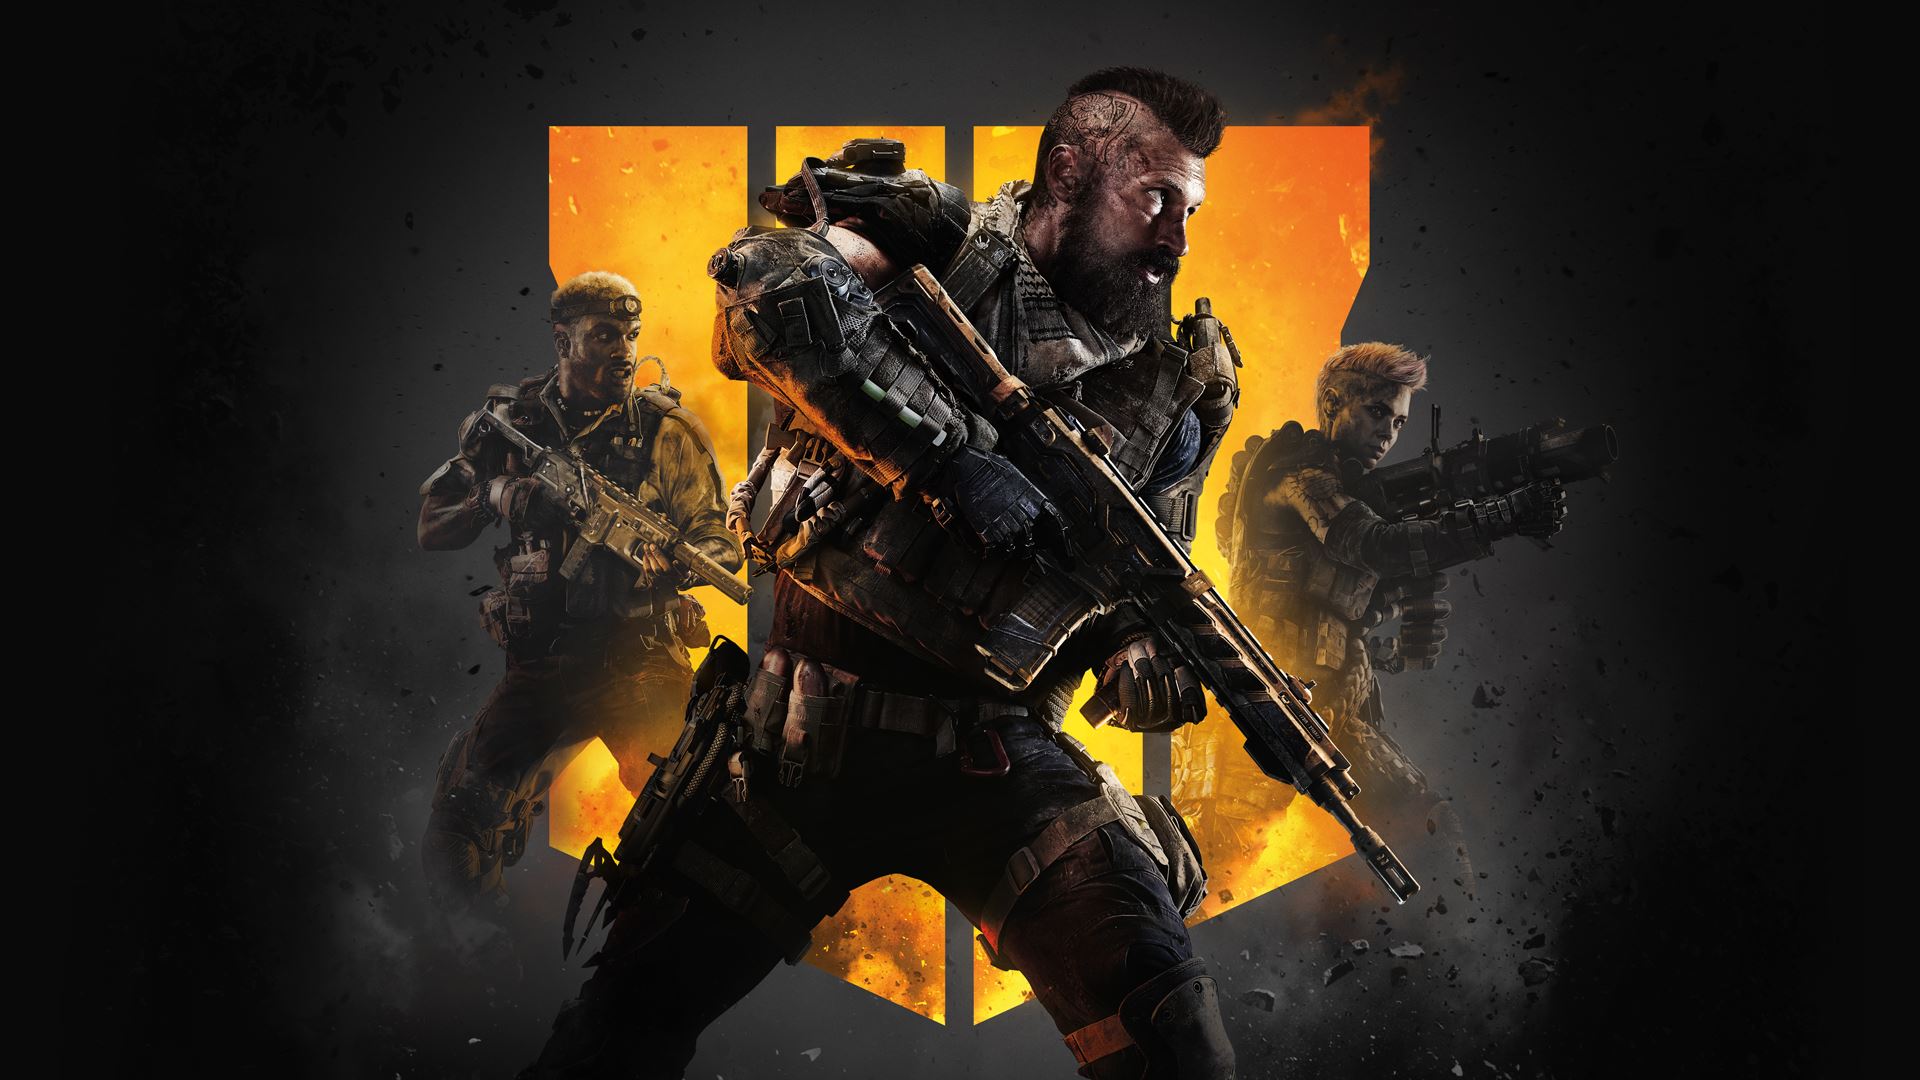 Video Game Call Of Duty: Black Ops 4 HD Wallpaper | Background Image